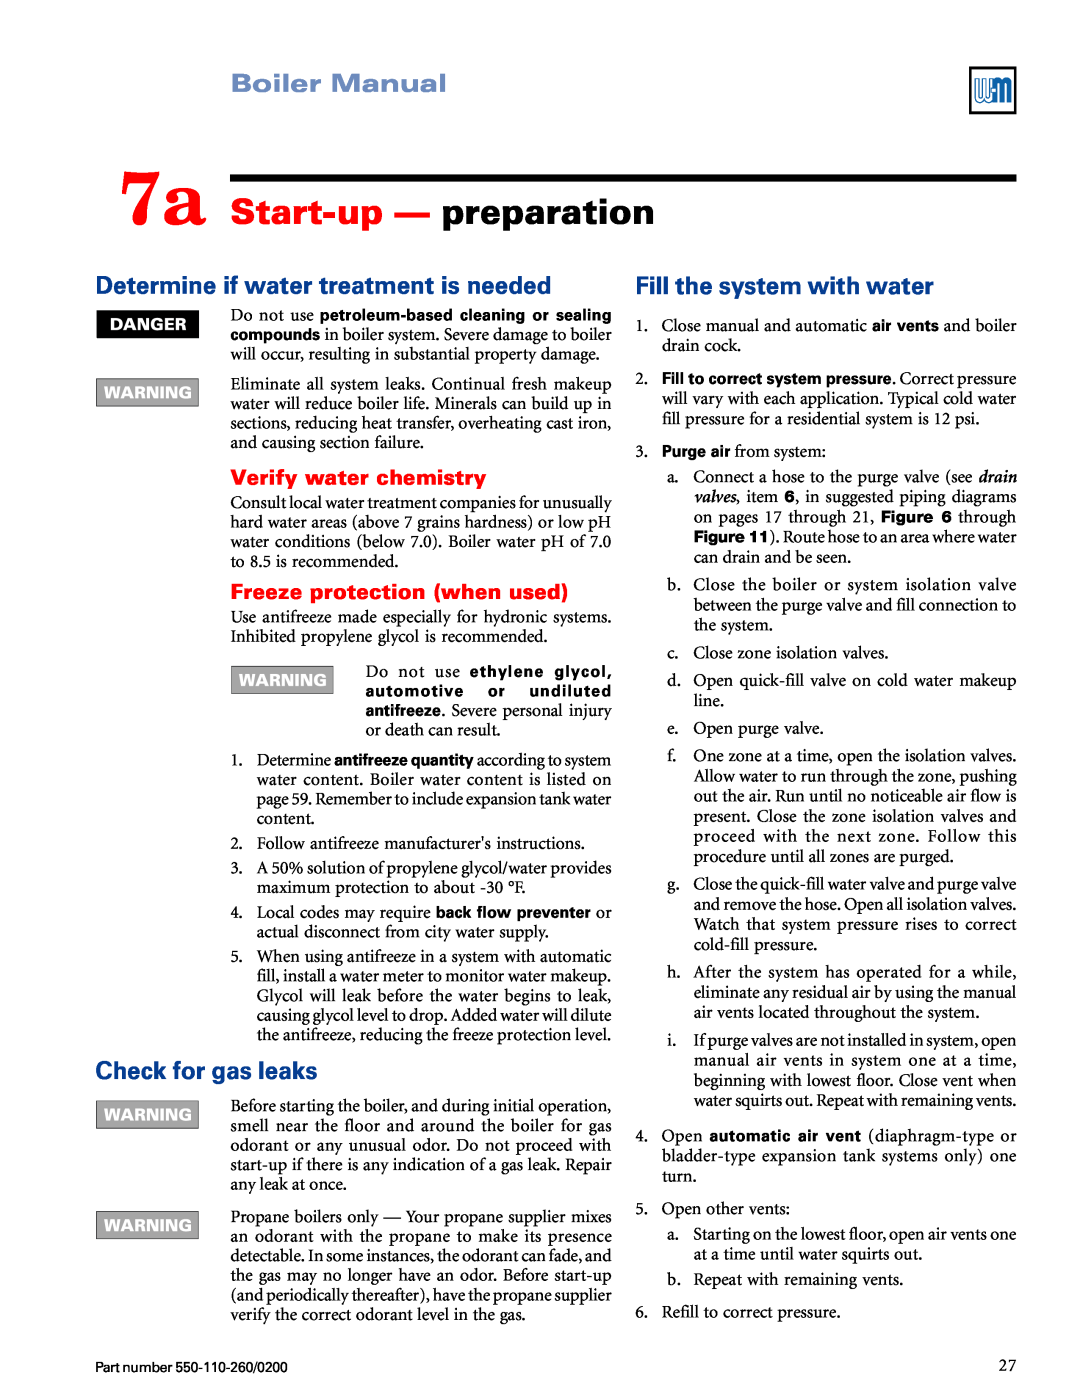 Weil-McLain 550-110-260/02002 manual 7a Start-up— preparation, Determine if water treatment is needed, Check for gas leaks 